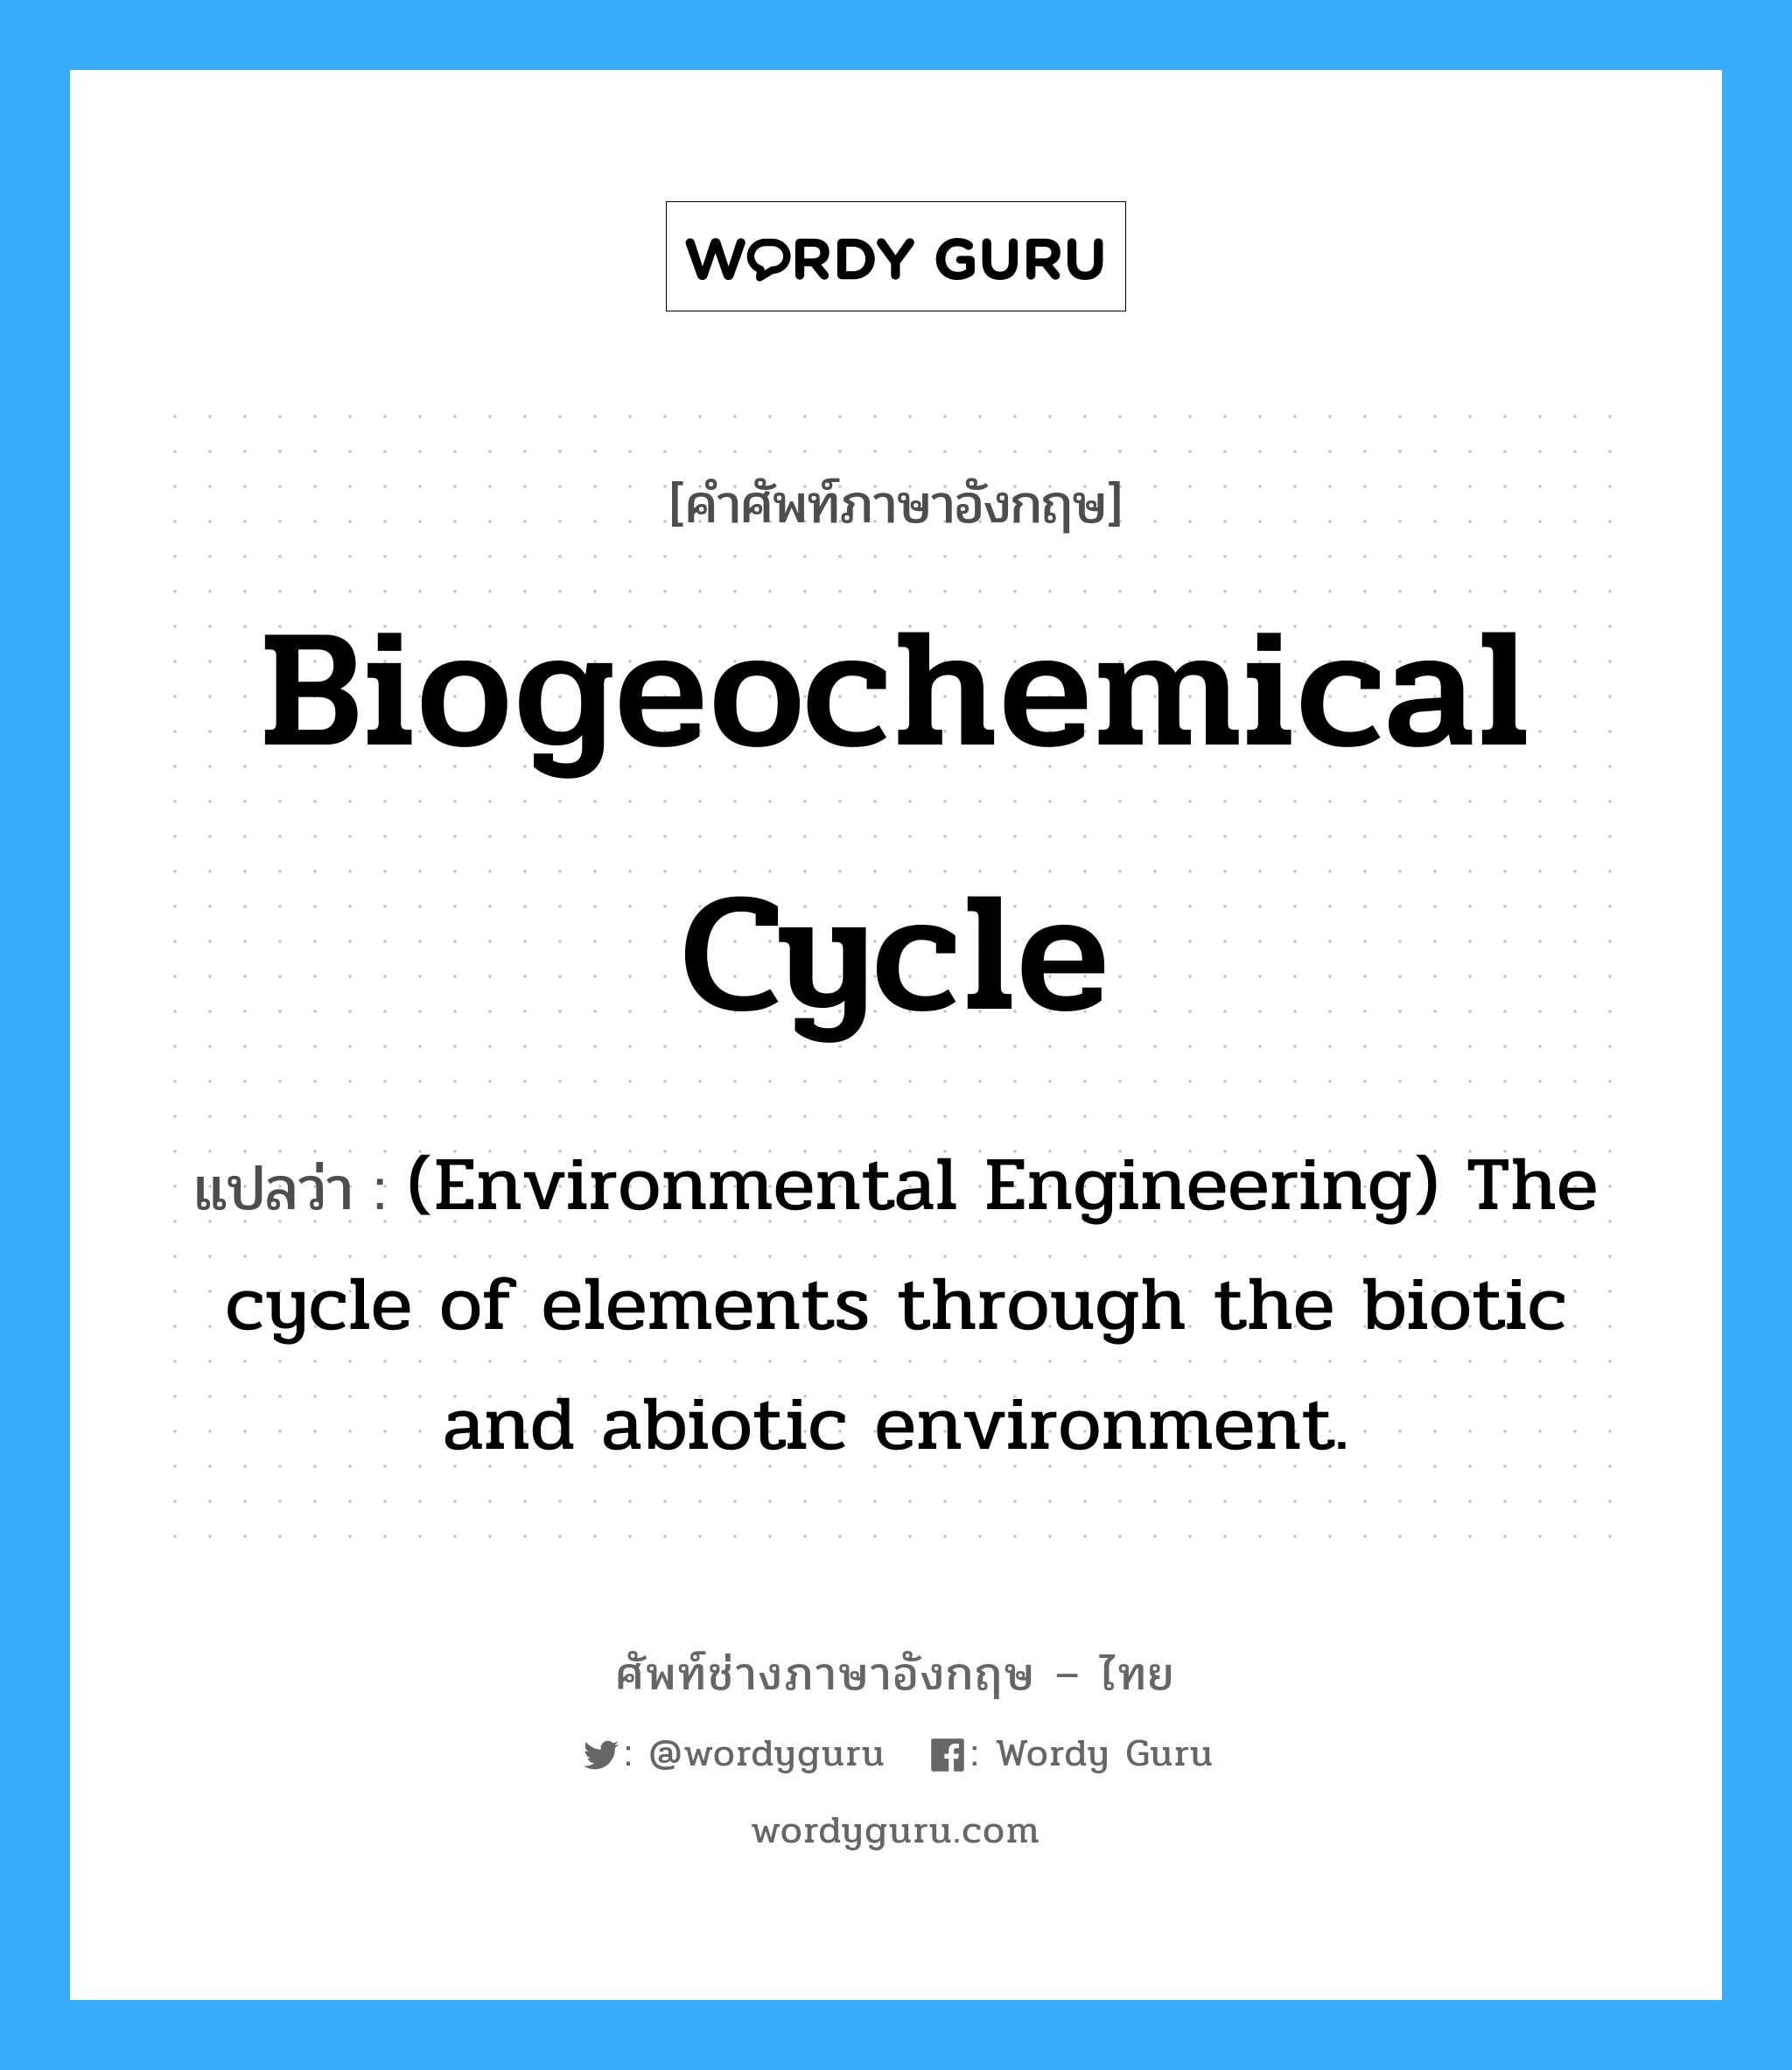 Biogeochemical cycle แปลว่า?, คำศัพท์ช่างภาษาอังกฤษ - ไทย Biogeochemical cycle คำศัพท์ภาษาอังกฤษ Biogeochemical cycle แปลว่า (Environmental Engineering) The cycle of elements through the biotic and abiotic environment.